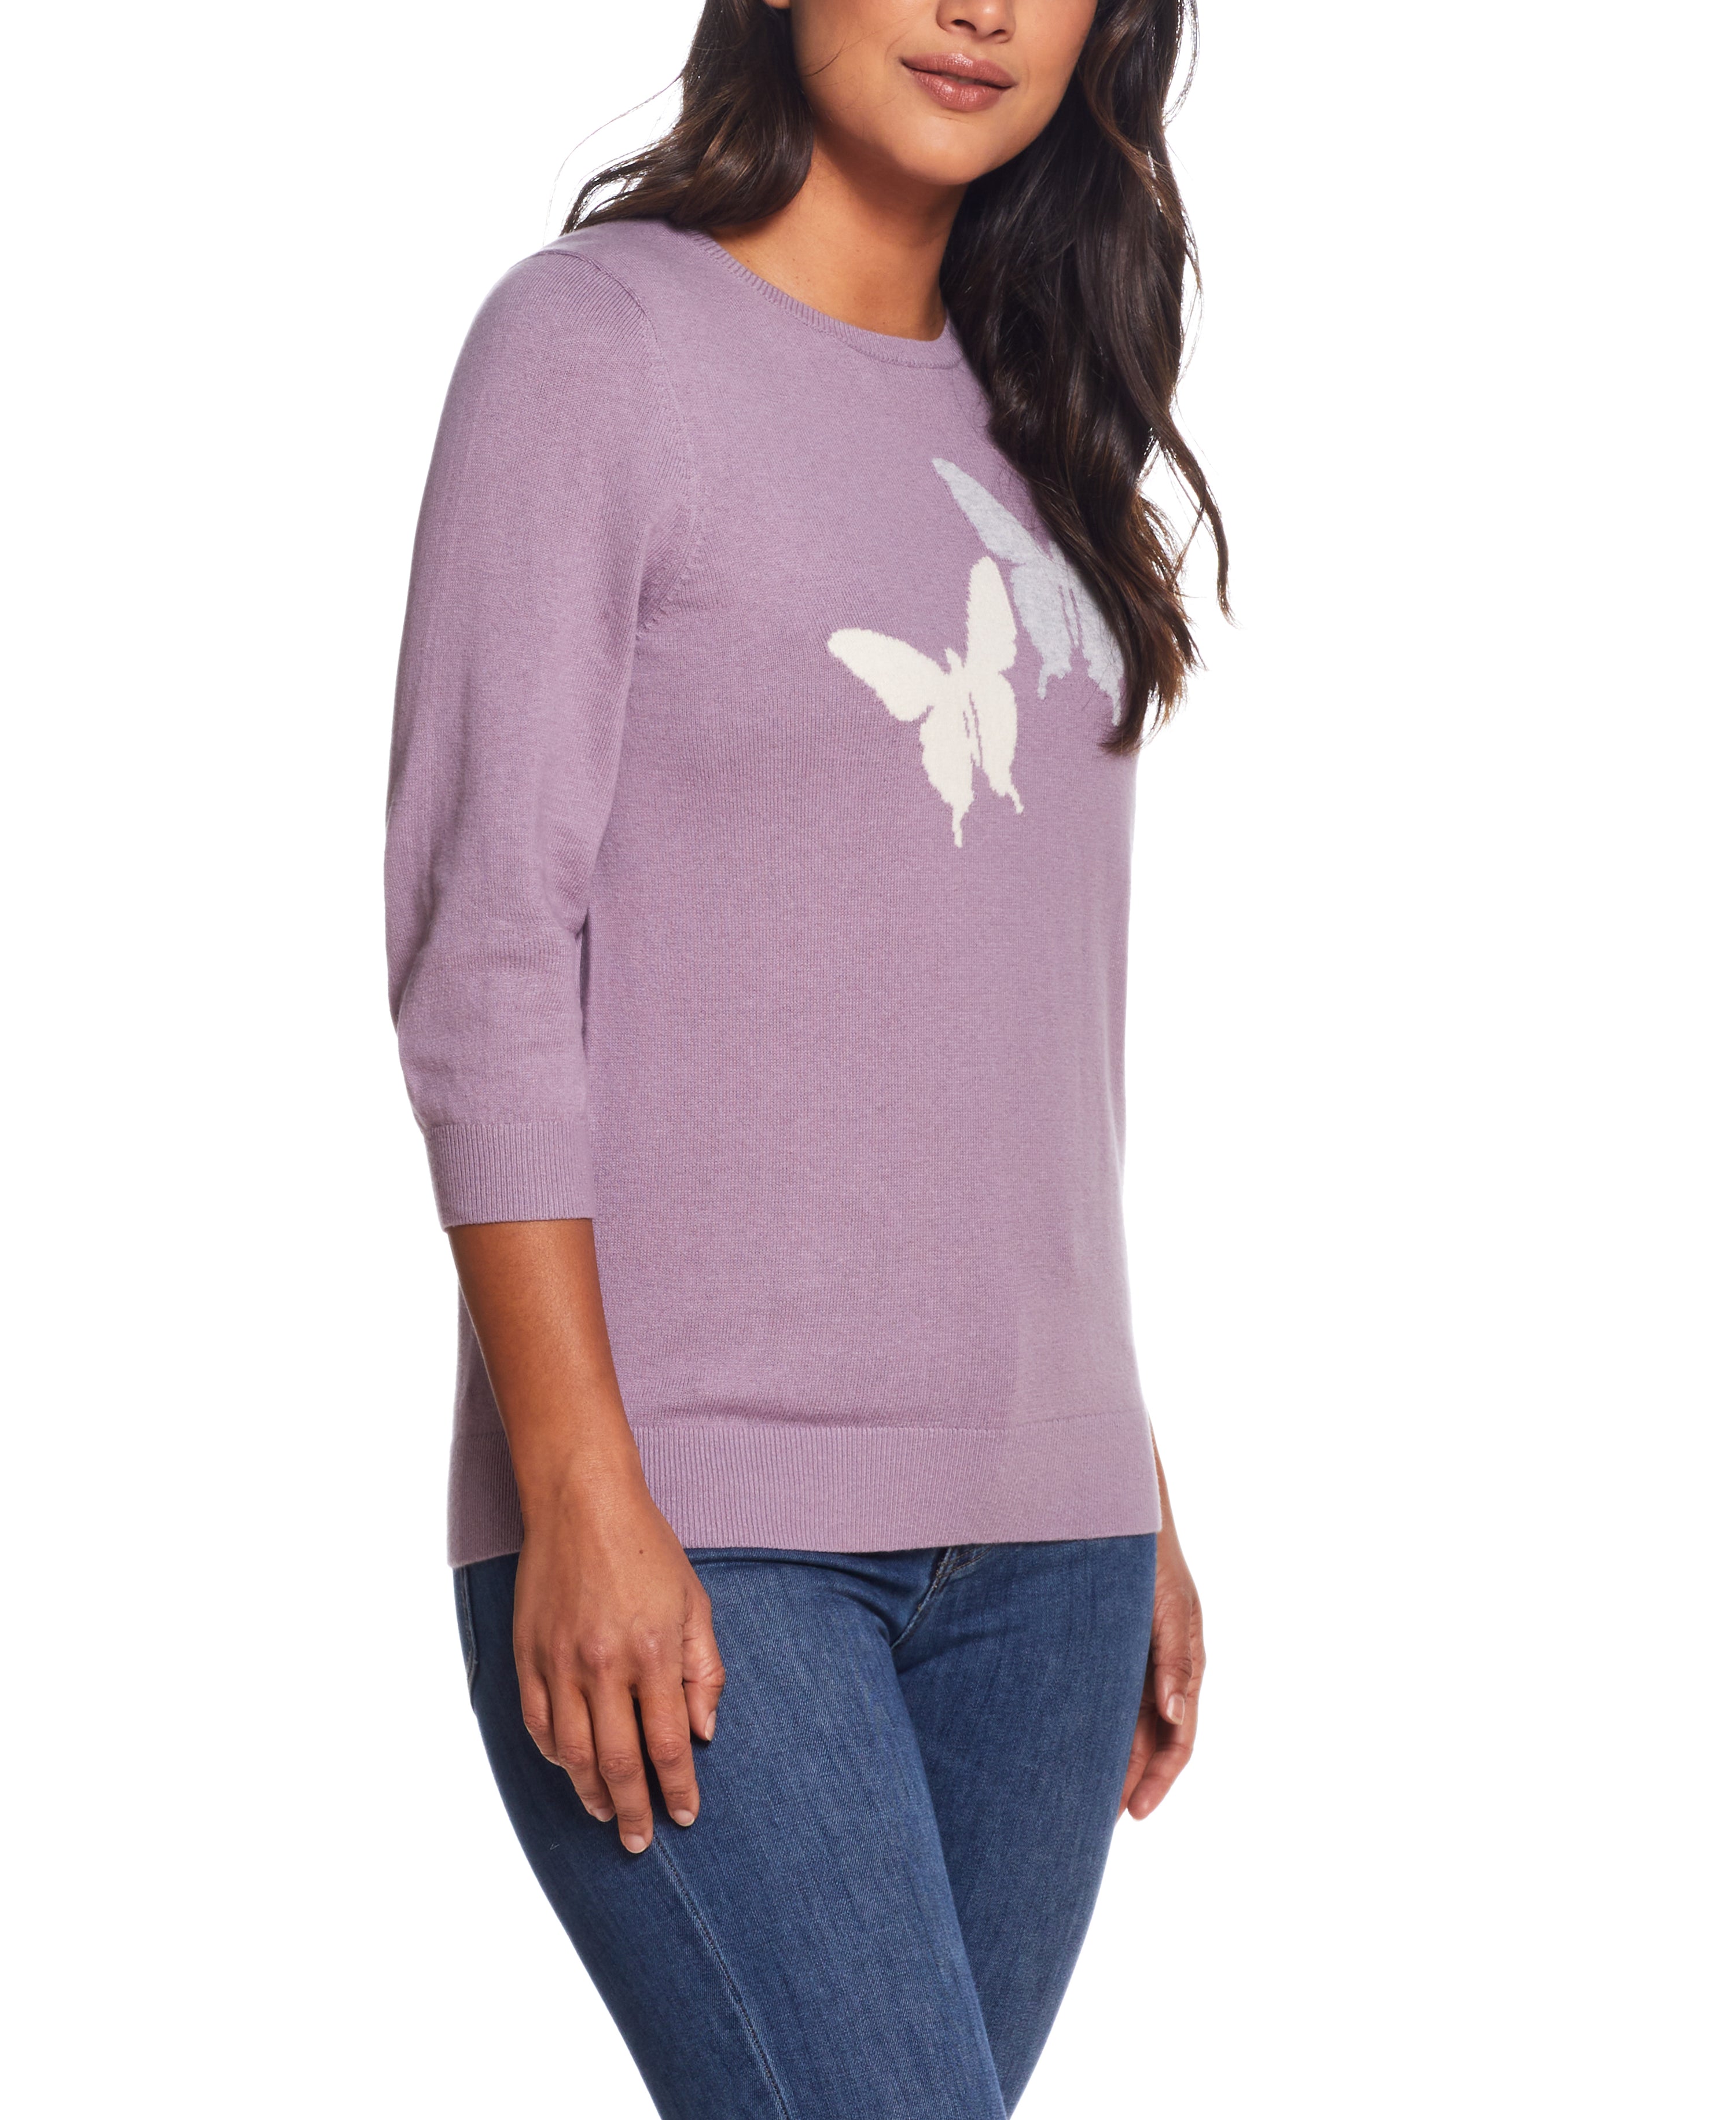 BUTTERFLY COTTON CASHMERE SWEATER in MIST